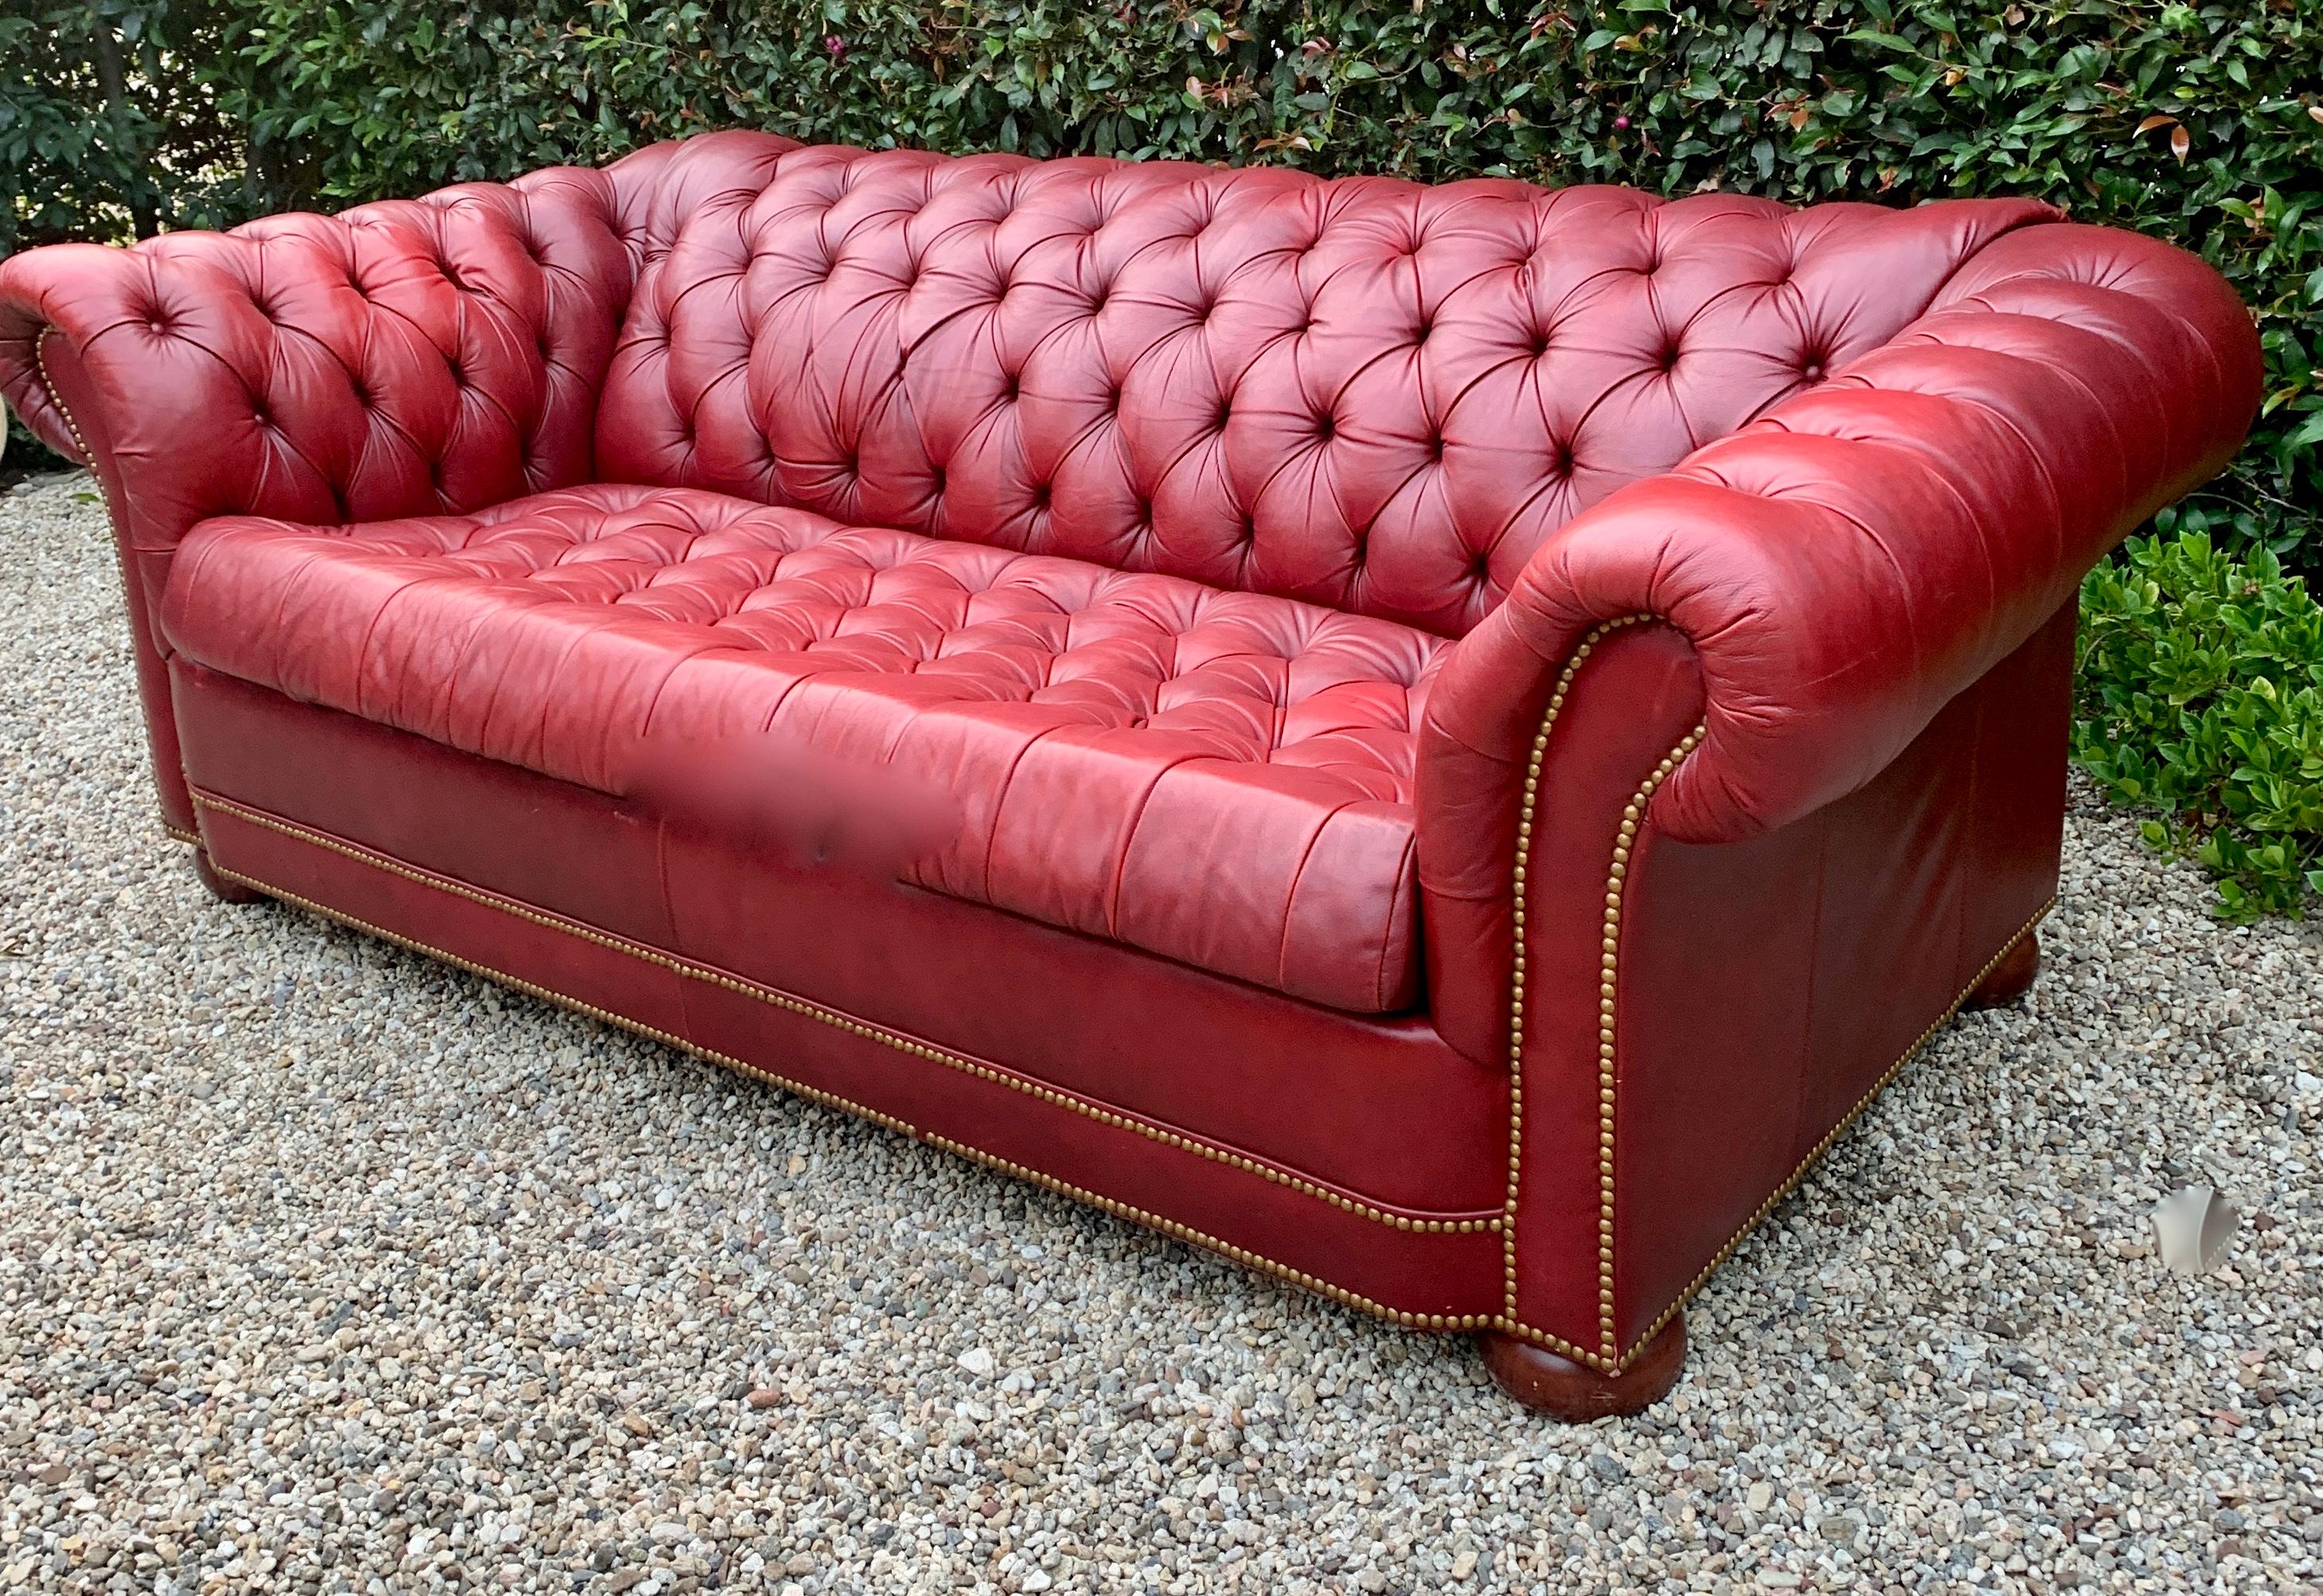 Red Leather Tufted Chesterfield Sleeper Sofa at 1stDibs | red leather sleeper  sofa, red leather chesterfield sofa bed, red leather tufted sofa